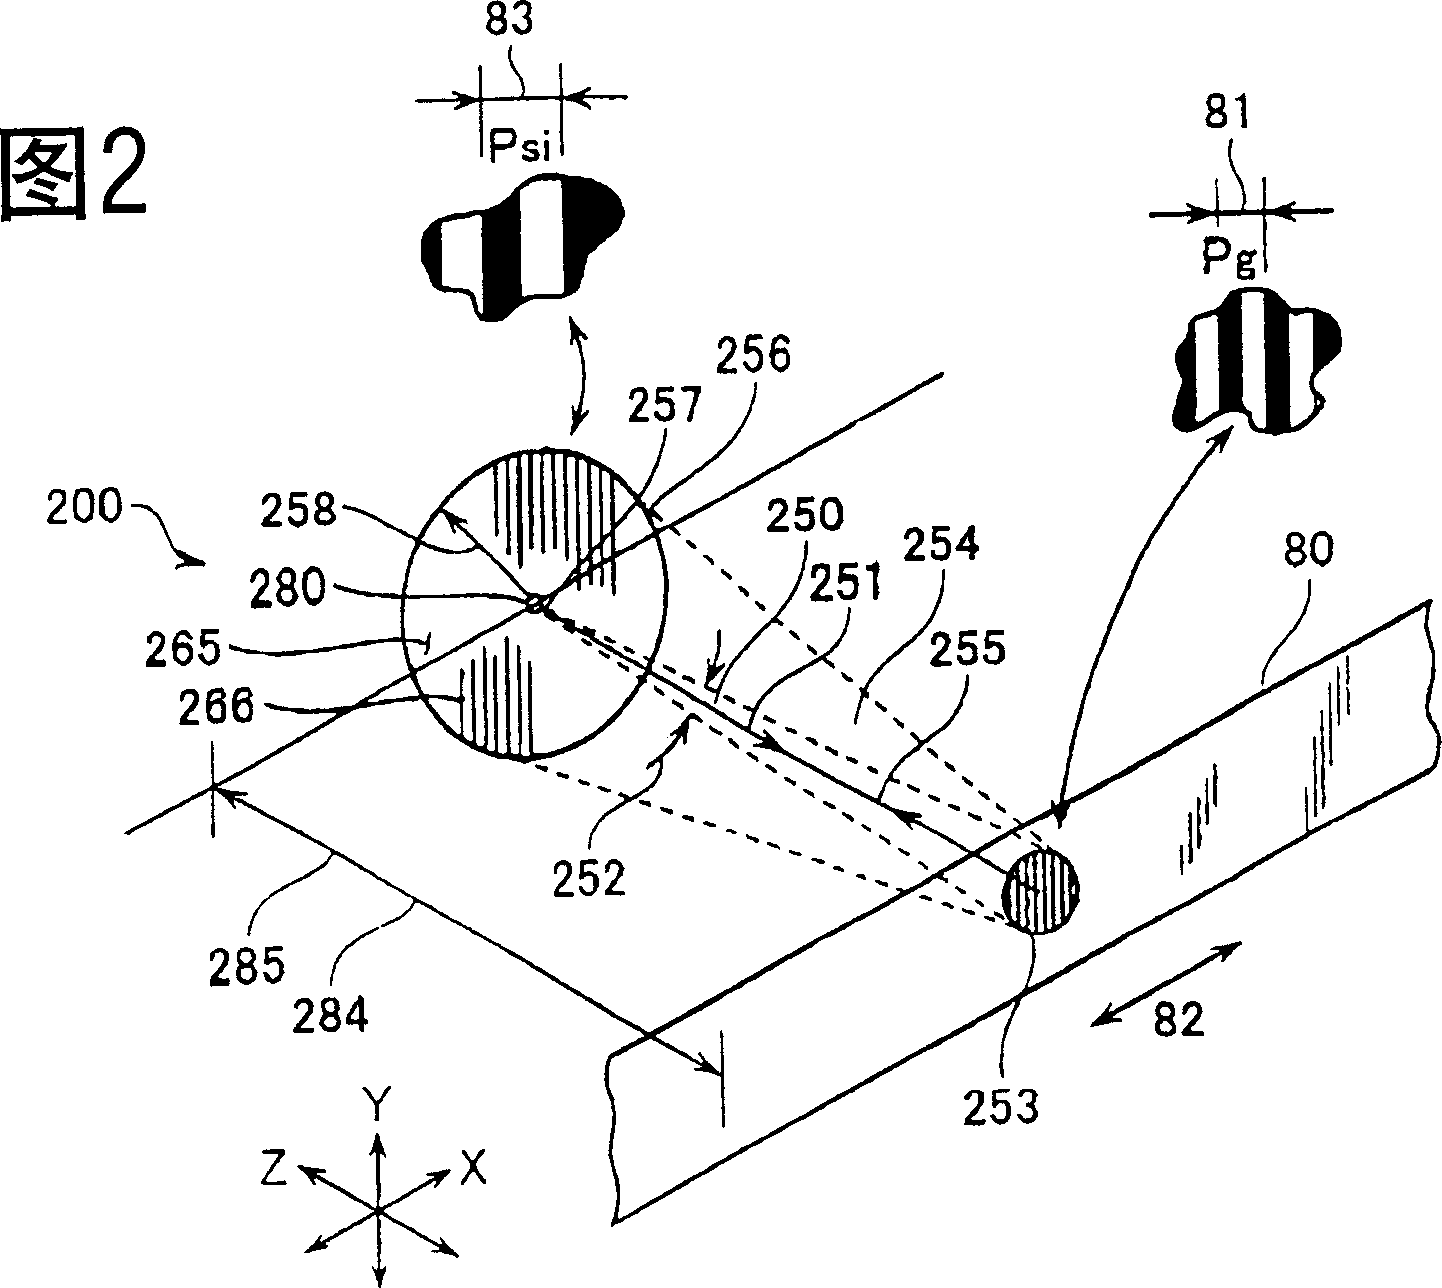 Raster code device and displacement measuring equipment using optical fibre receiver channel